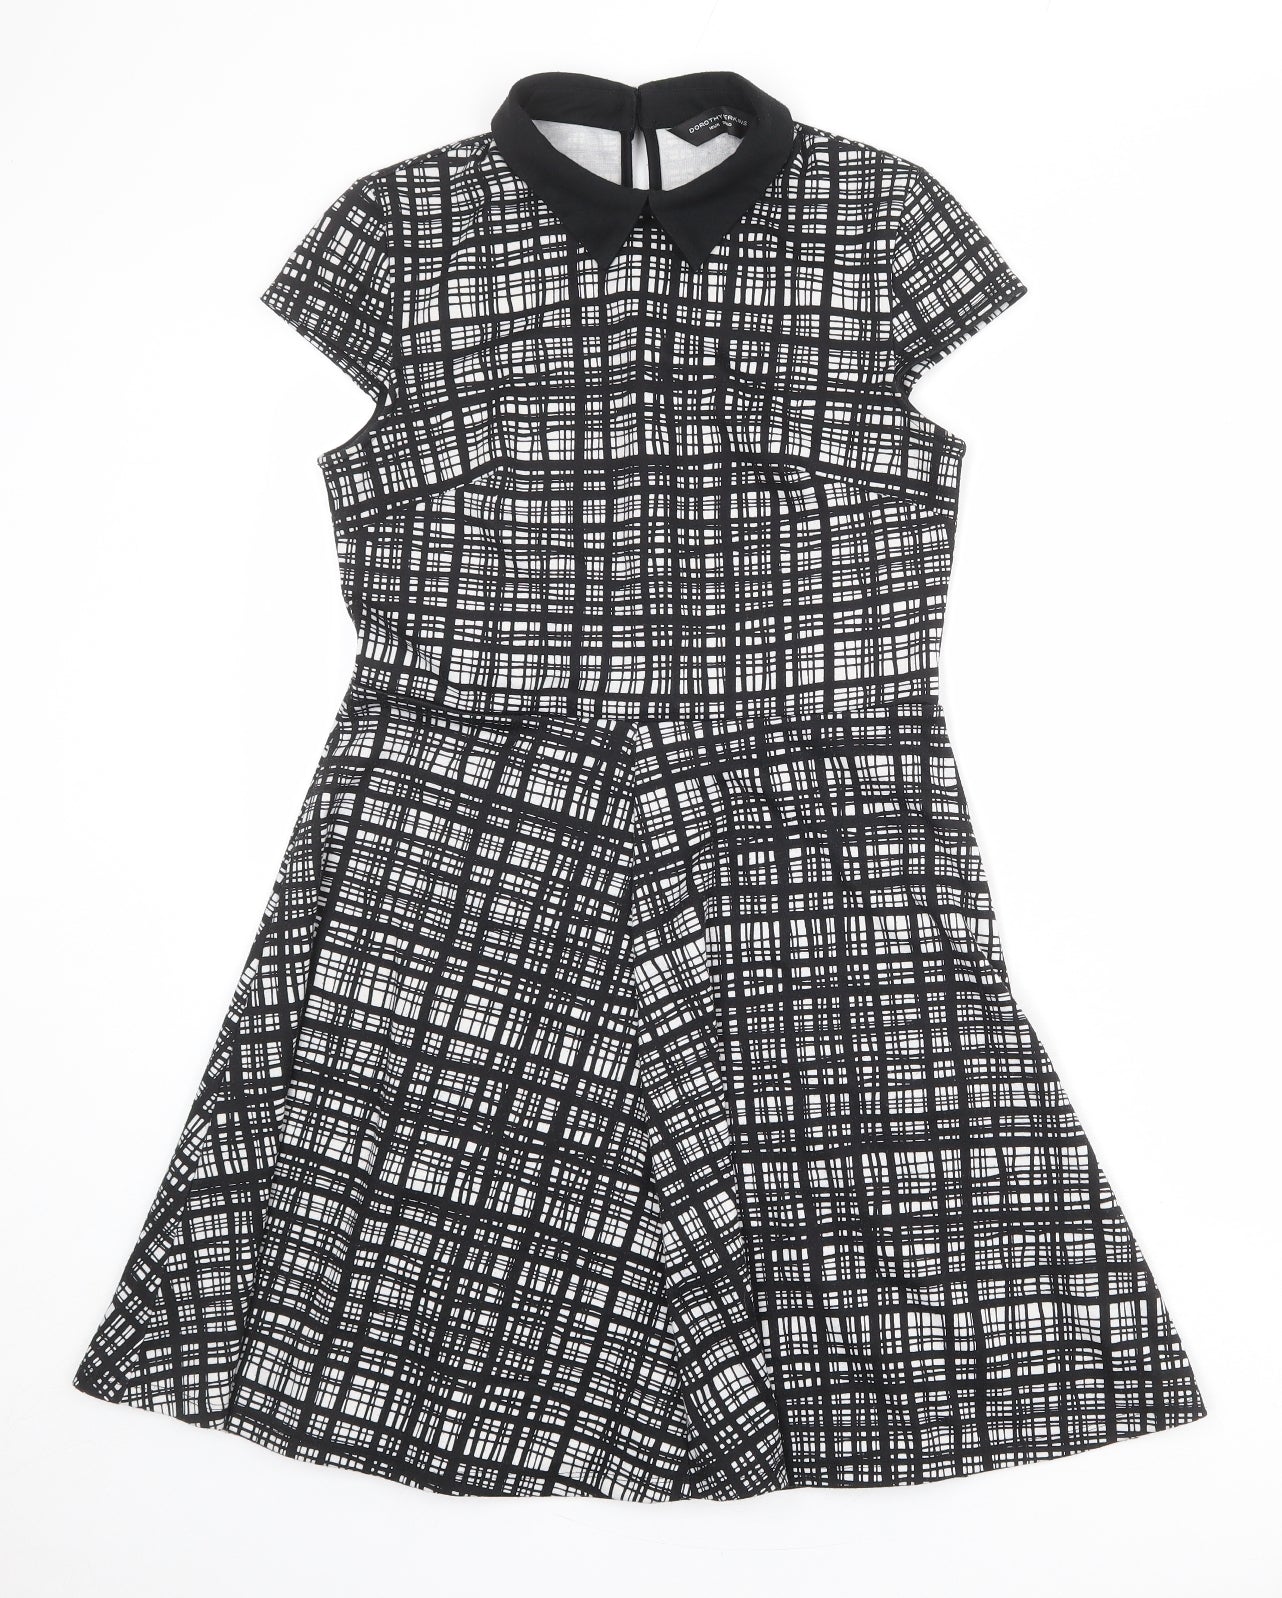 Dorothy Perkins Womens Black Geometric Polyester Skater Dress Size 10 Collared Button